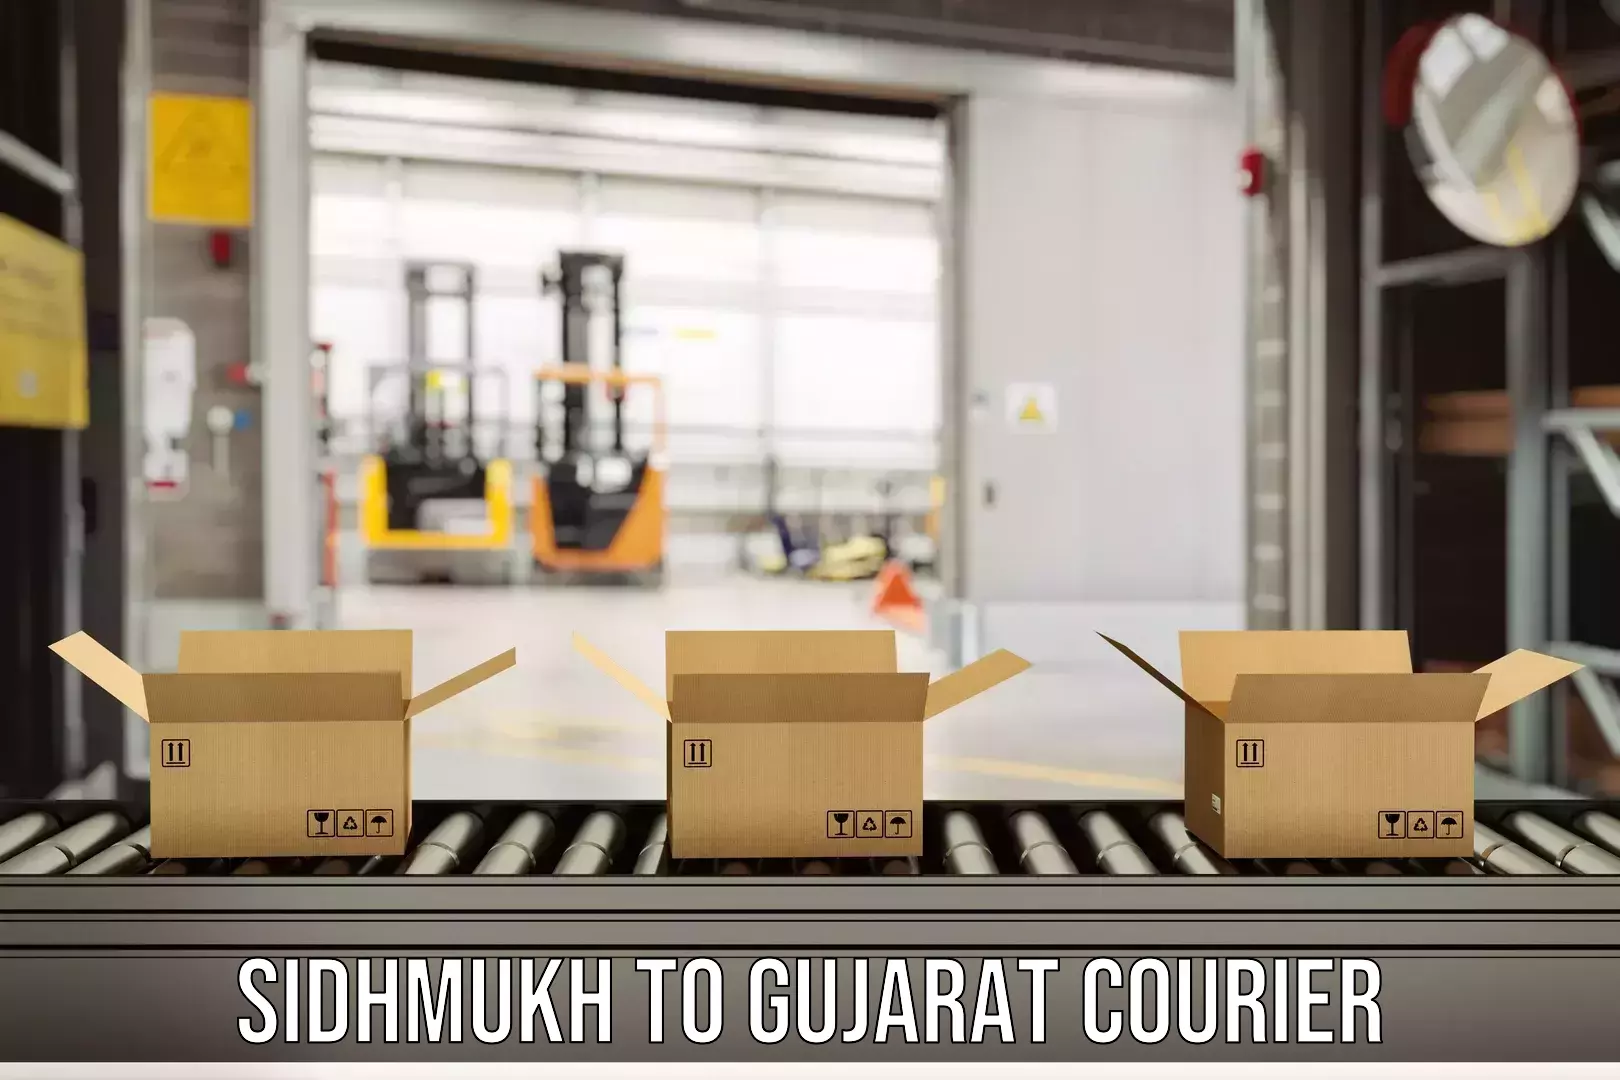 International courier networks Sidhmukh to Gujarat